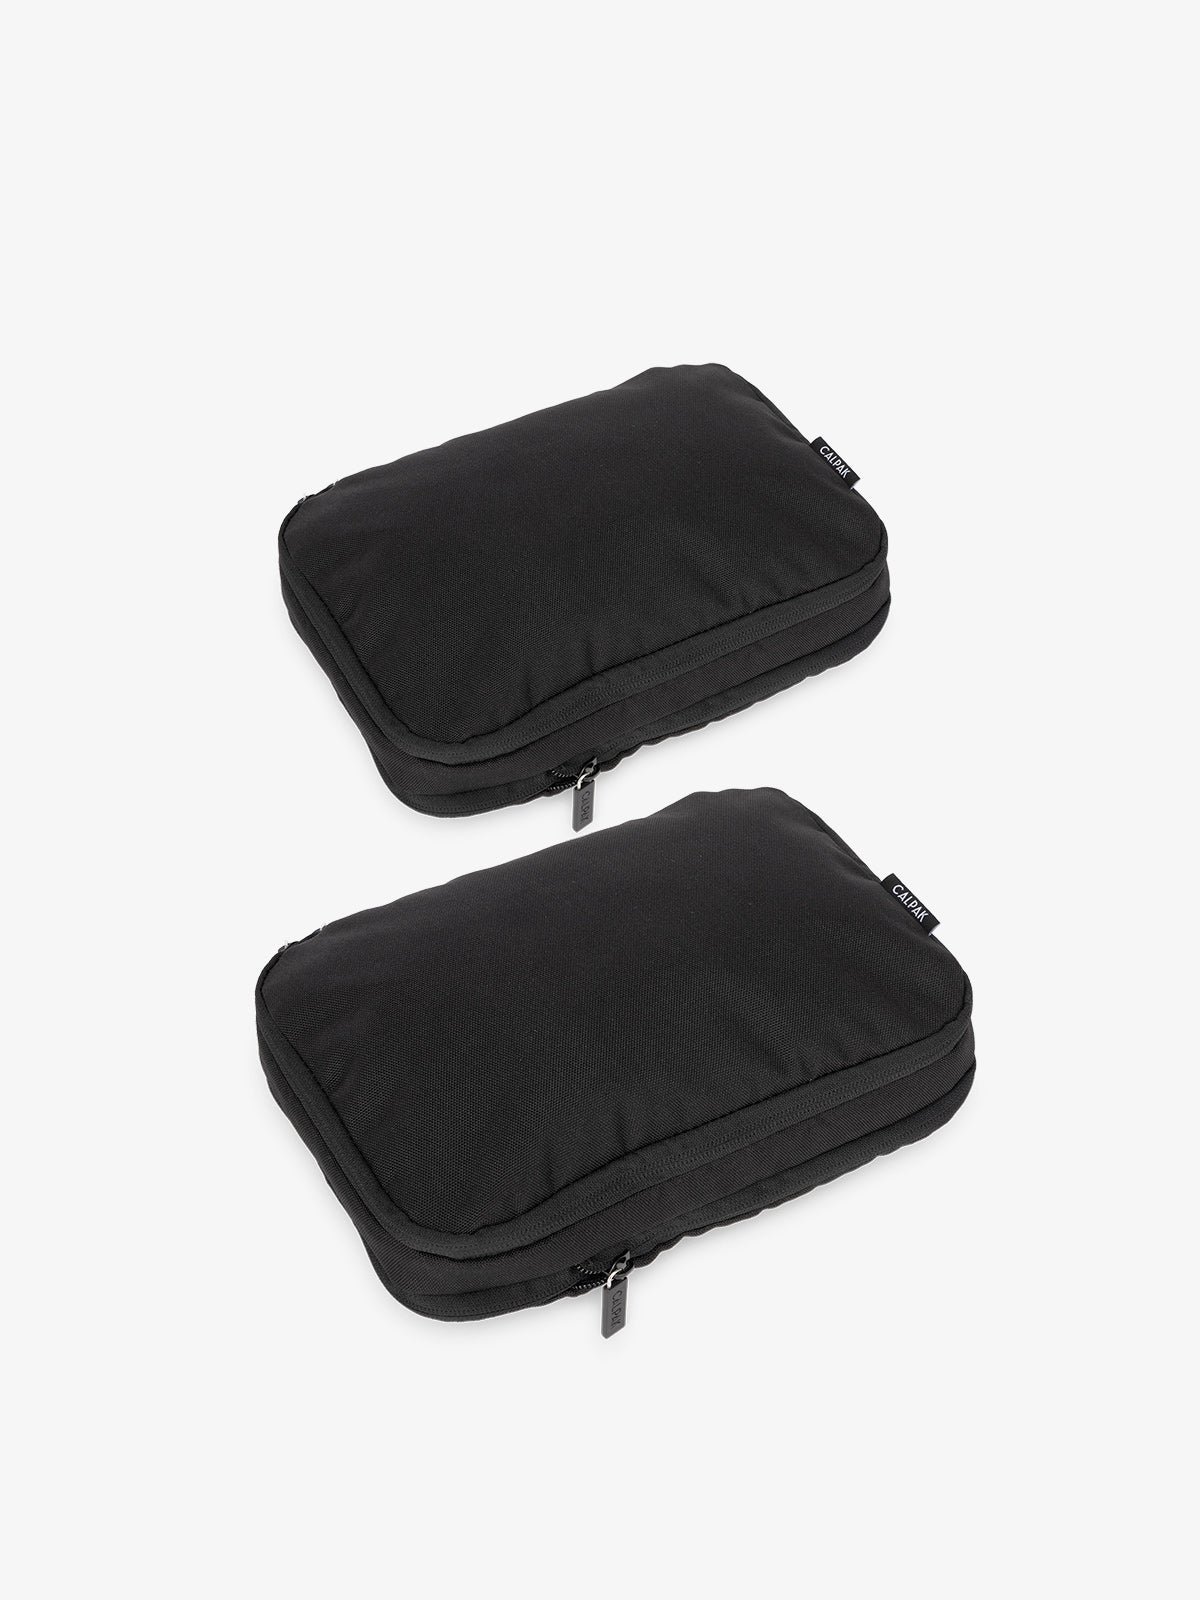 CALPAK small compression packing cubes in black